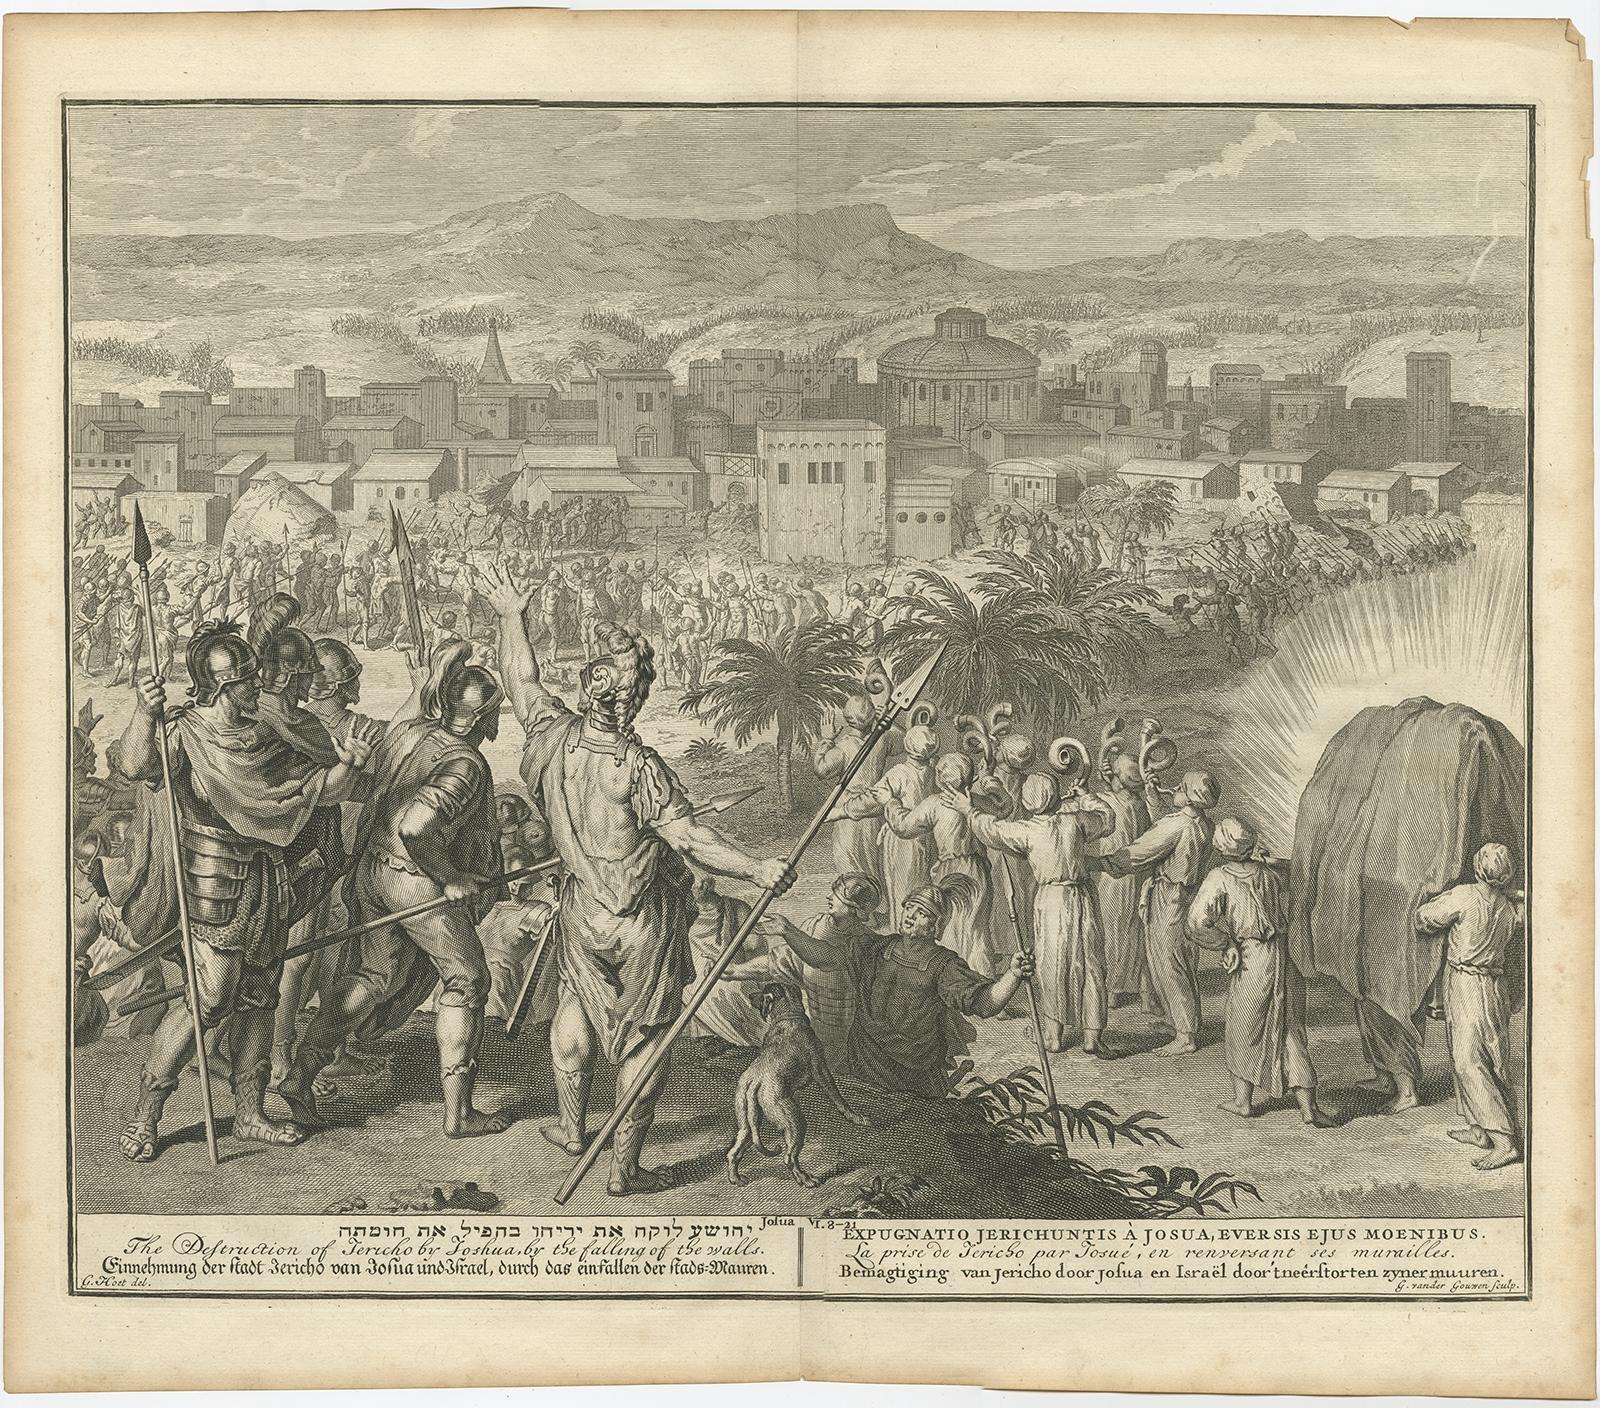 Antique print titled 'The Destruction of Jericho by Joshua, by the falling of the walls'. Battle of Jericho. In the narrative of the conquest of Canaan in the Book of Joshua, the Battle of Jericho is the first battle that is described. According to